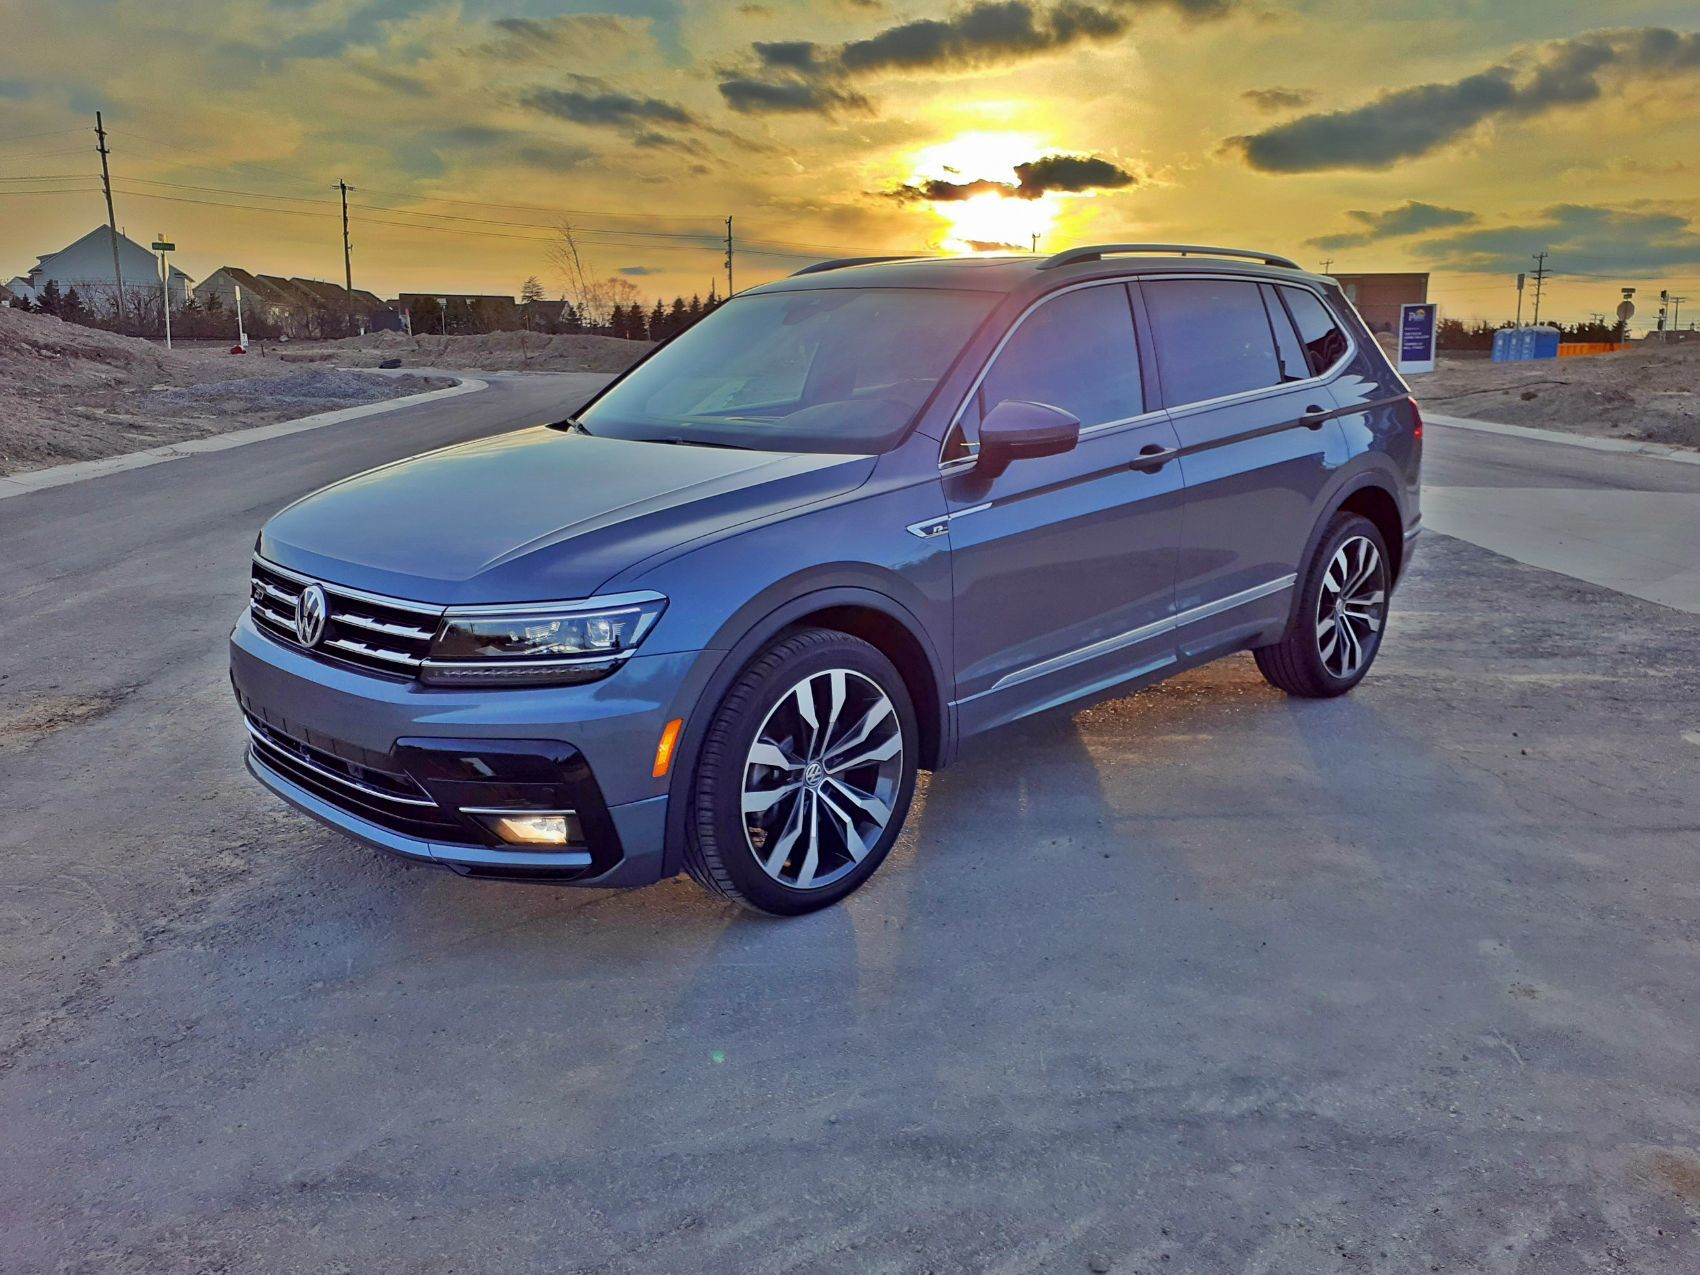 2020 VW Tiguan Review: Not Our Cup of Tea & Here's Why